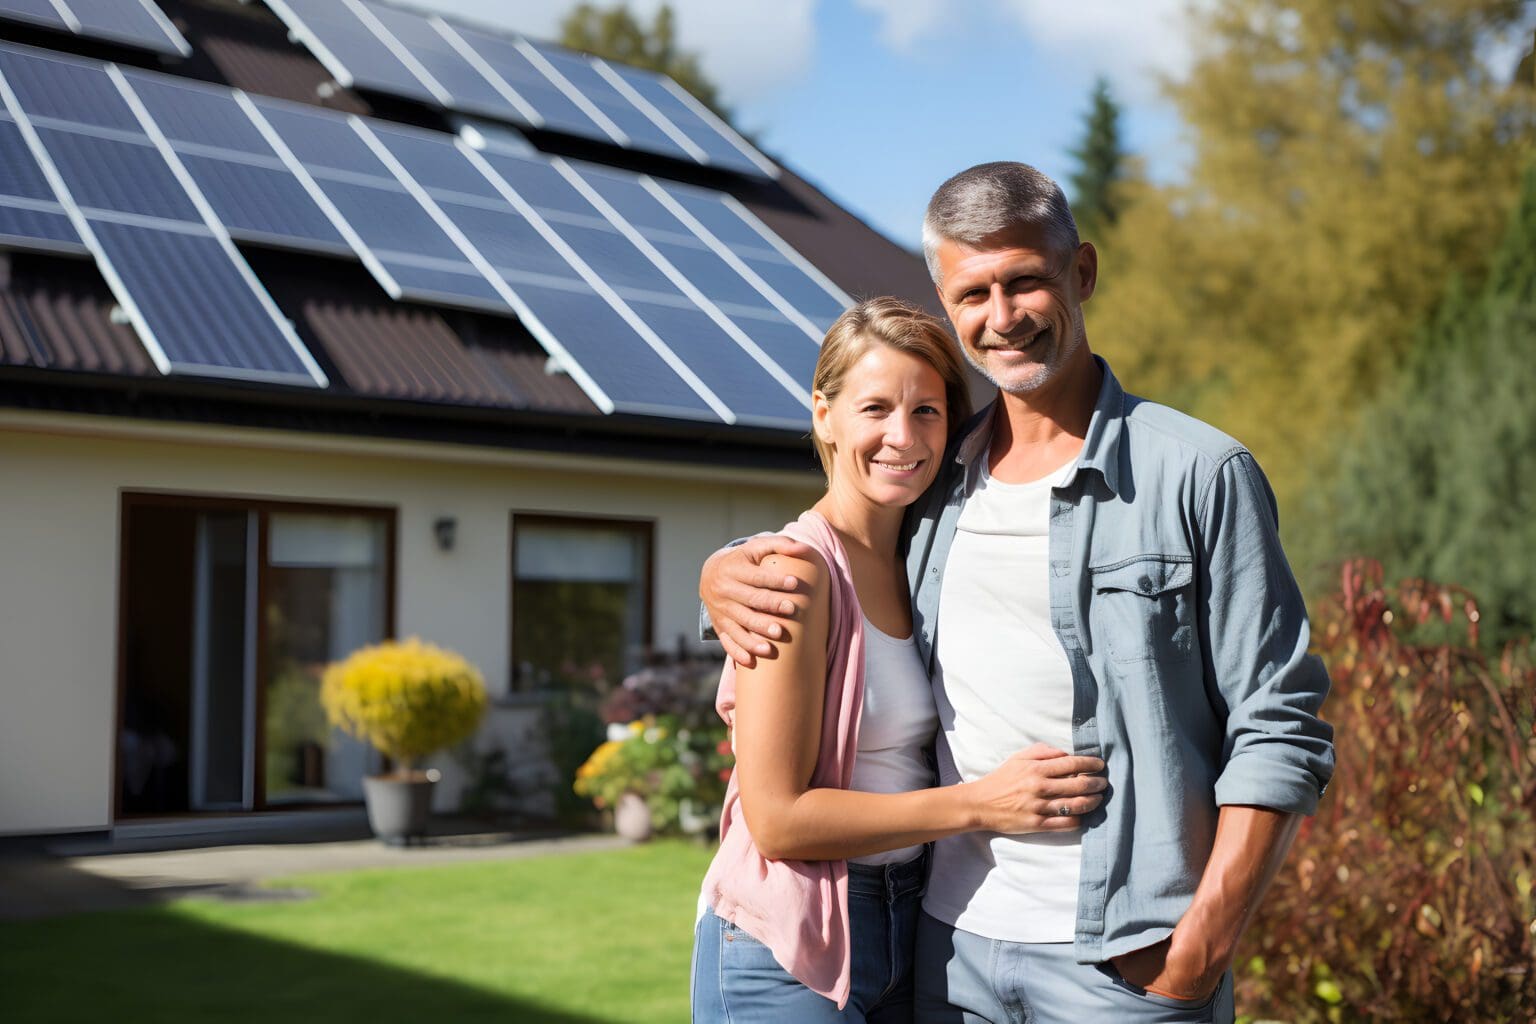 A happy couple stands smiling in the driveway of a large house with solar panels installed. Real estate new home concept